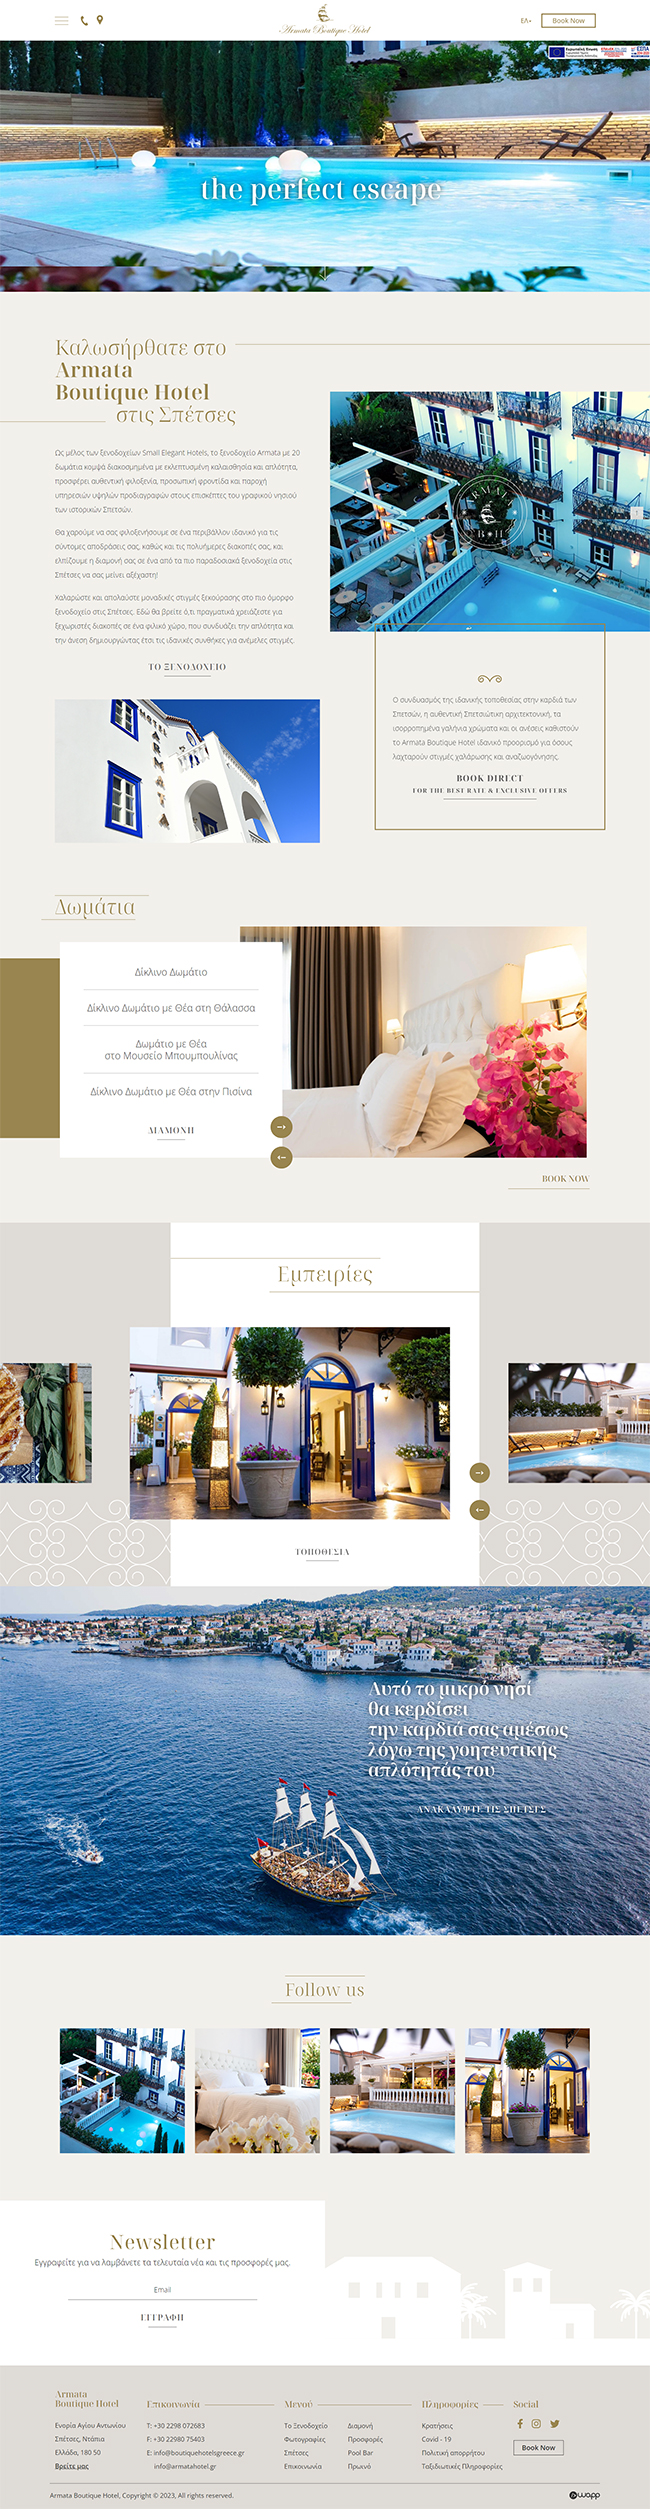 Responsive website for Armata Boutique Hotel in Spetses